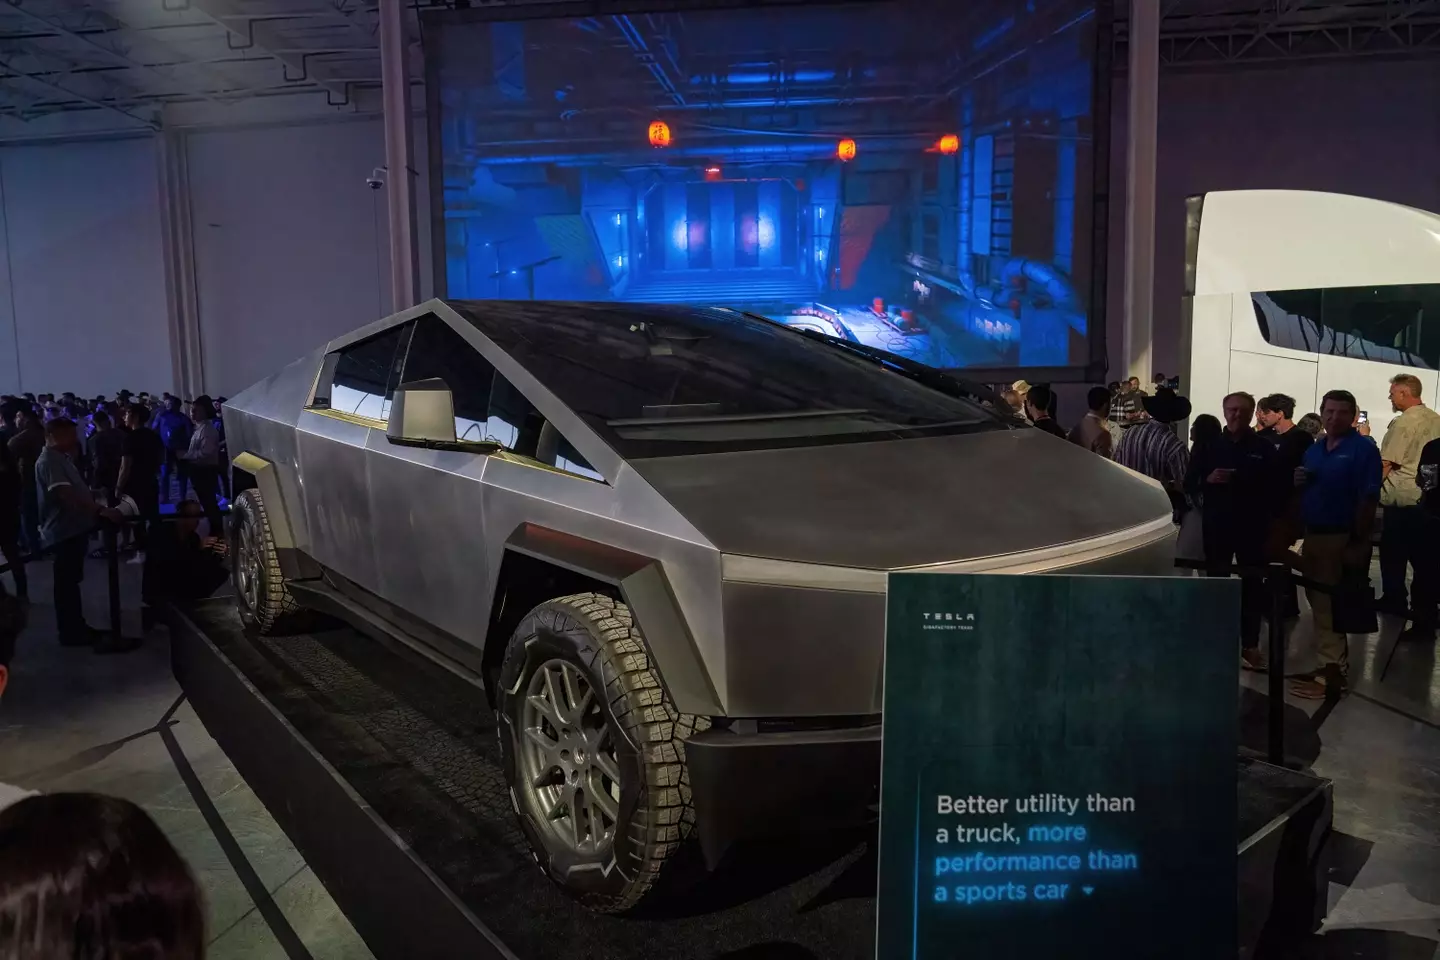 The Cybertruck on display in April 2022.